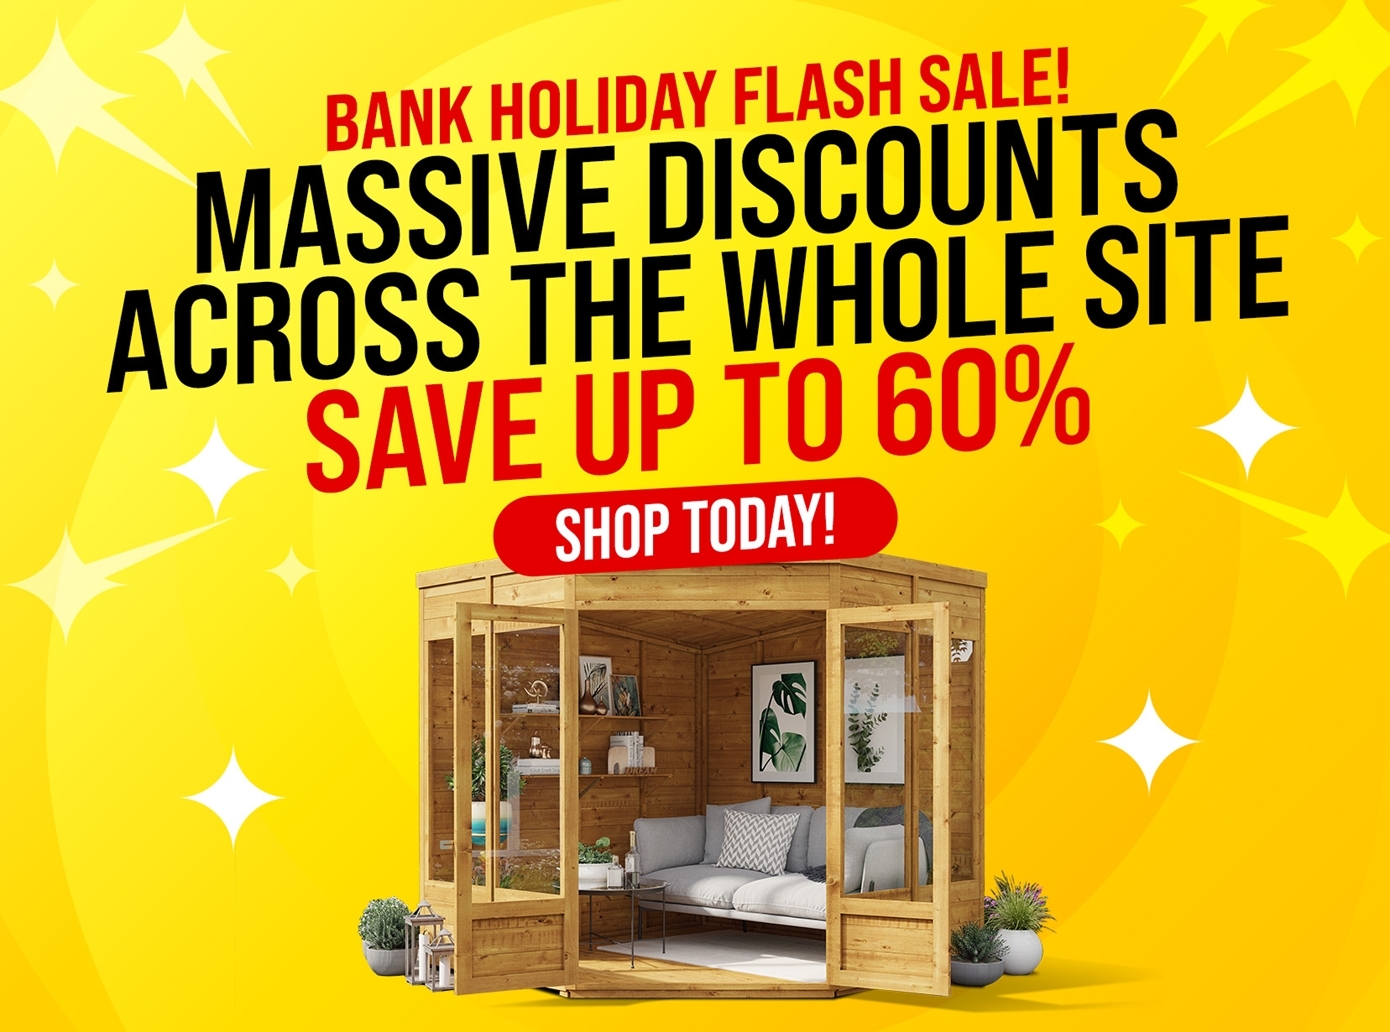 bank holiday flash sale! massive discount across the whole site save up to 60%